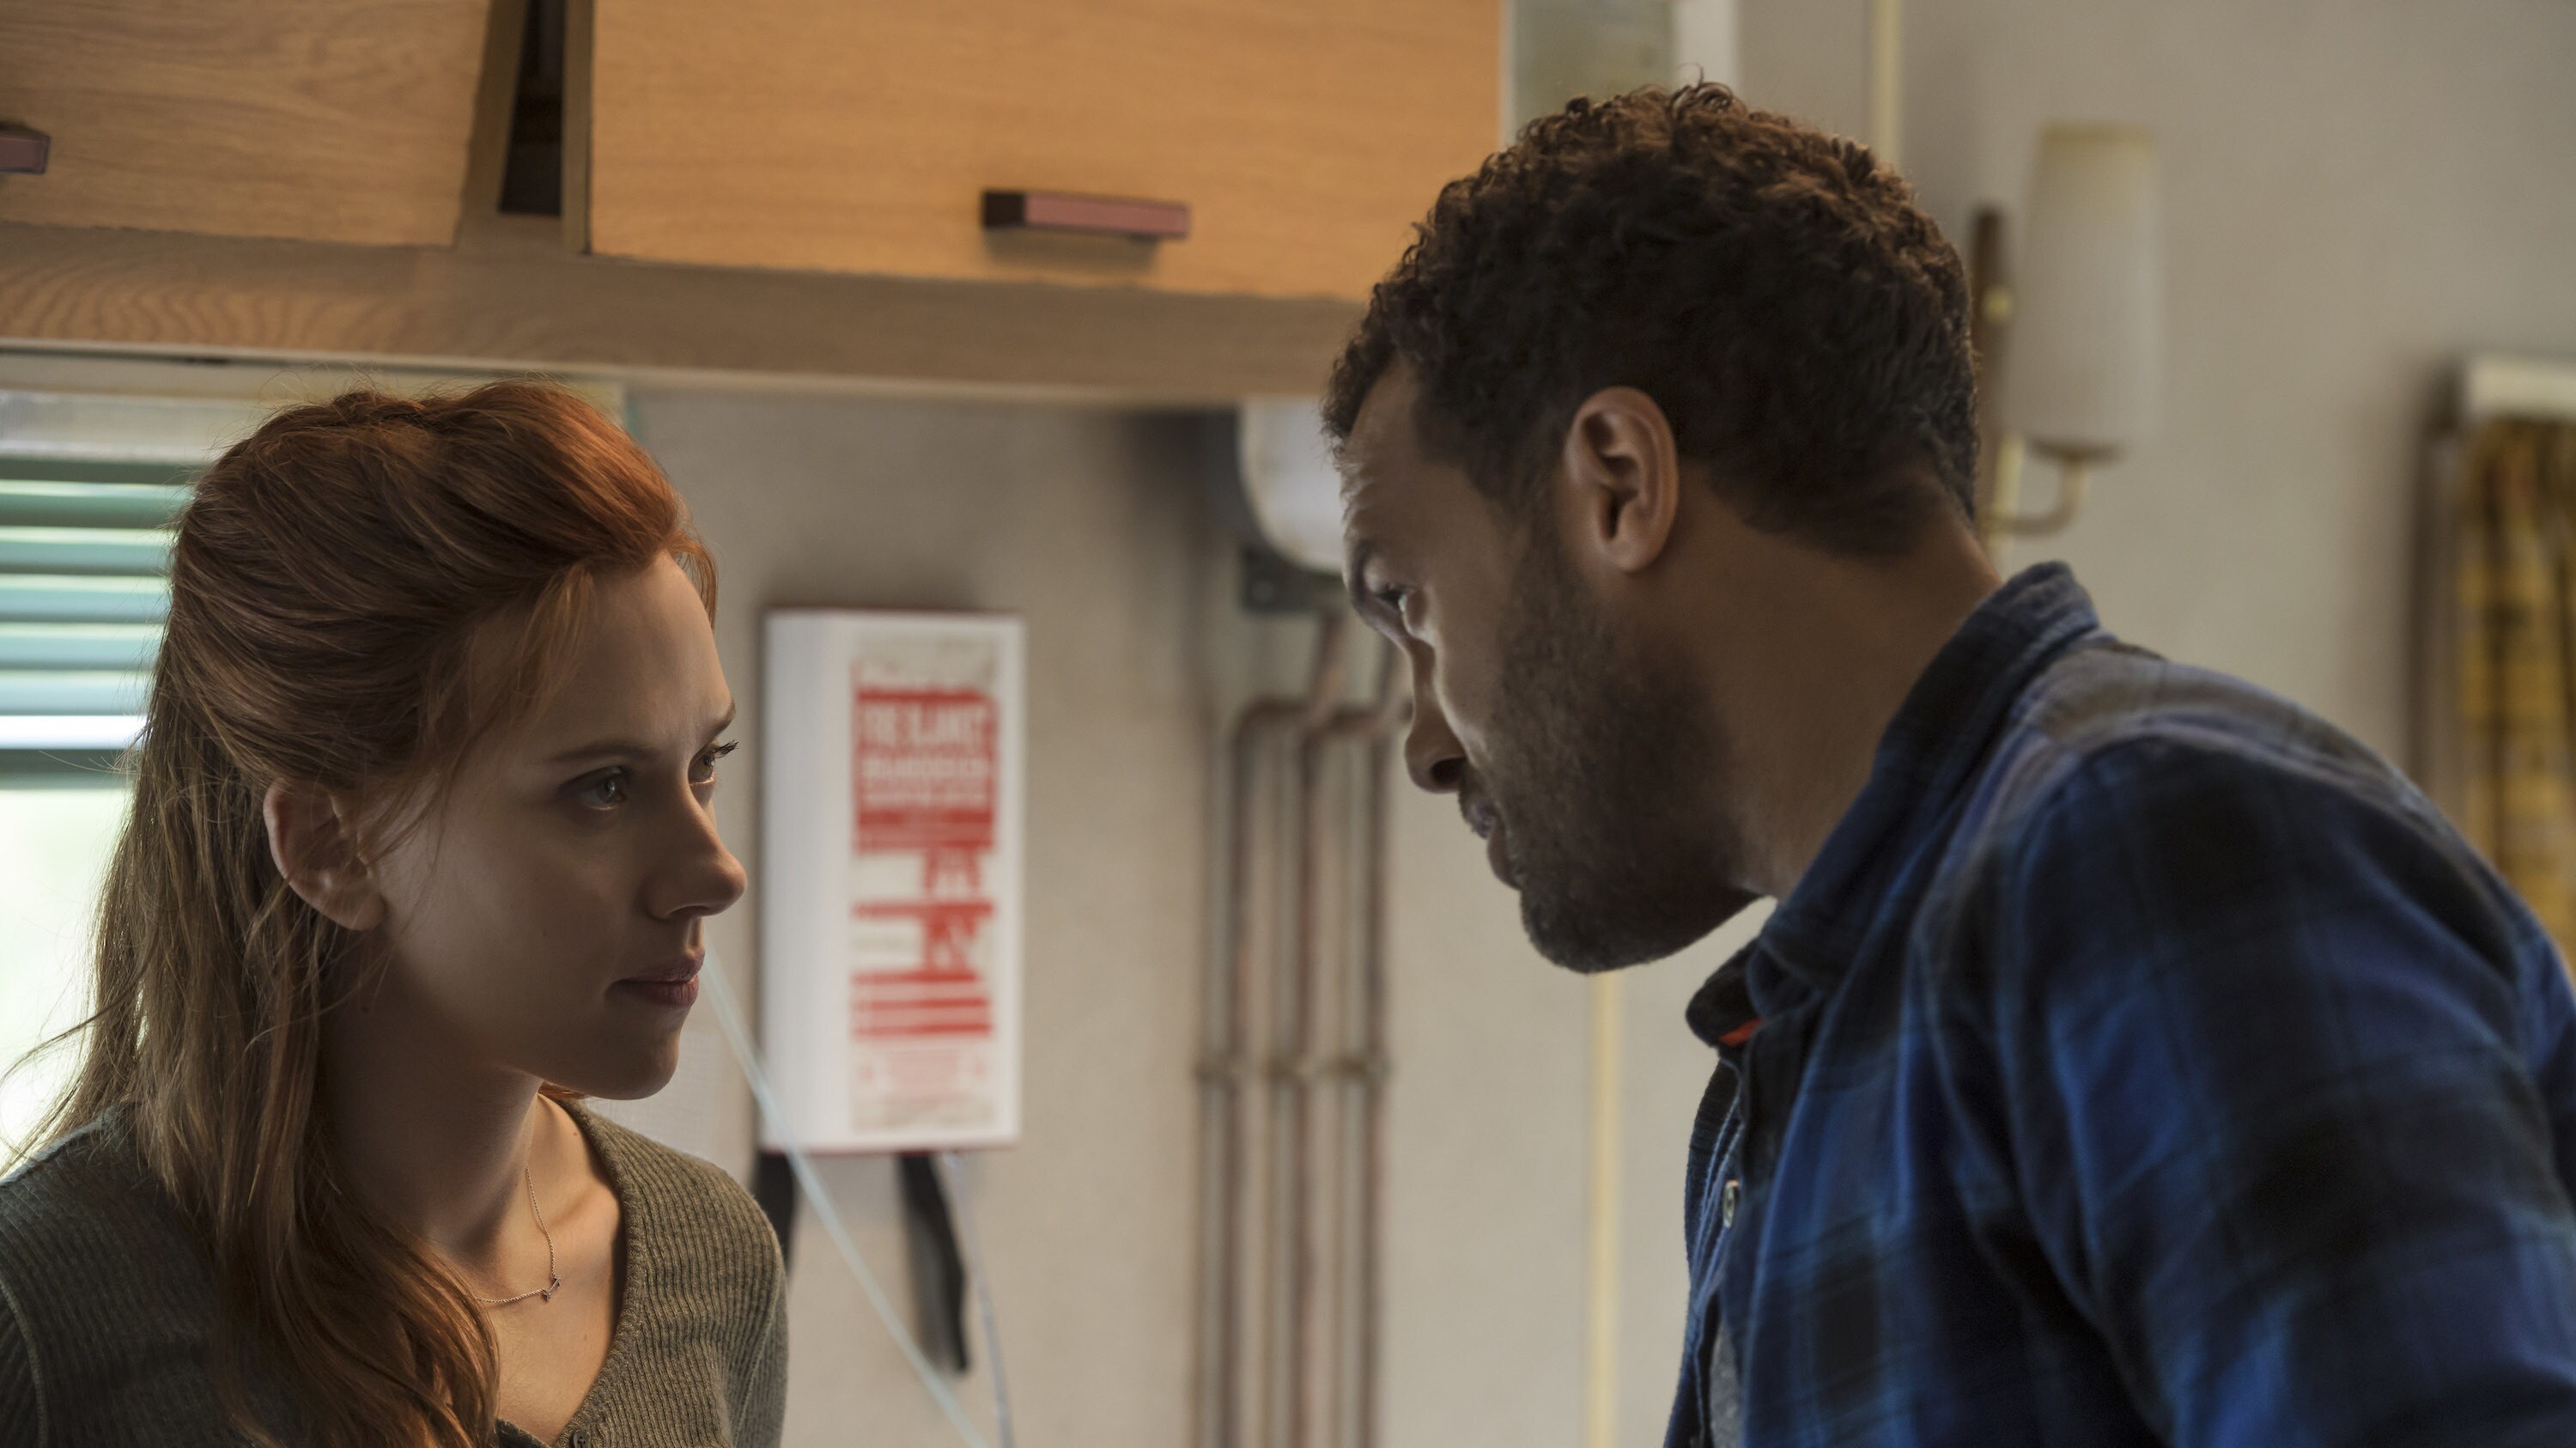 (L-R): Black Widow/Natasha Romanoff (Scarlett Johansson) and Mason (O-T Fagbenle) in Marvel Studios' BLACK WIDOW, in theaters and on Disney+ with Premier Access. Photo by Jay Maidment. ©Marvel Studios 2021. All Rights Reserved